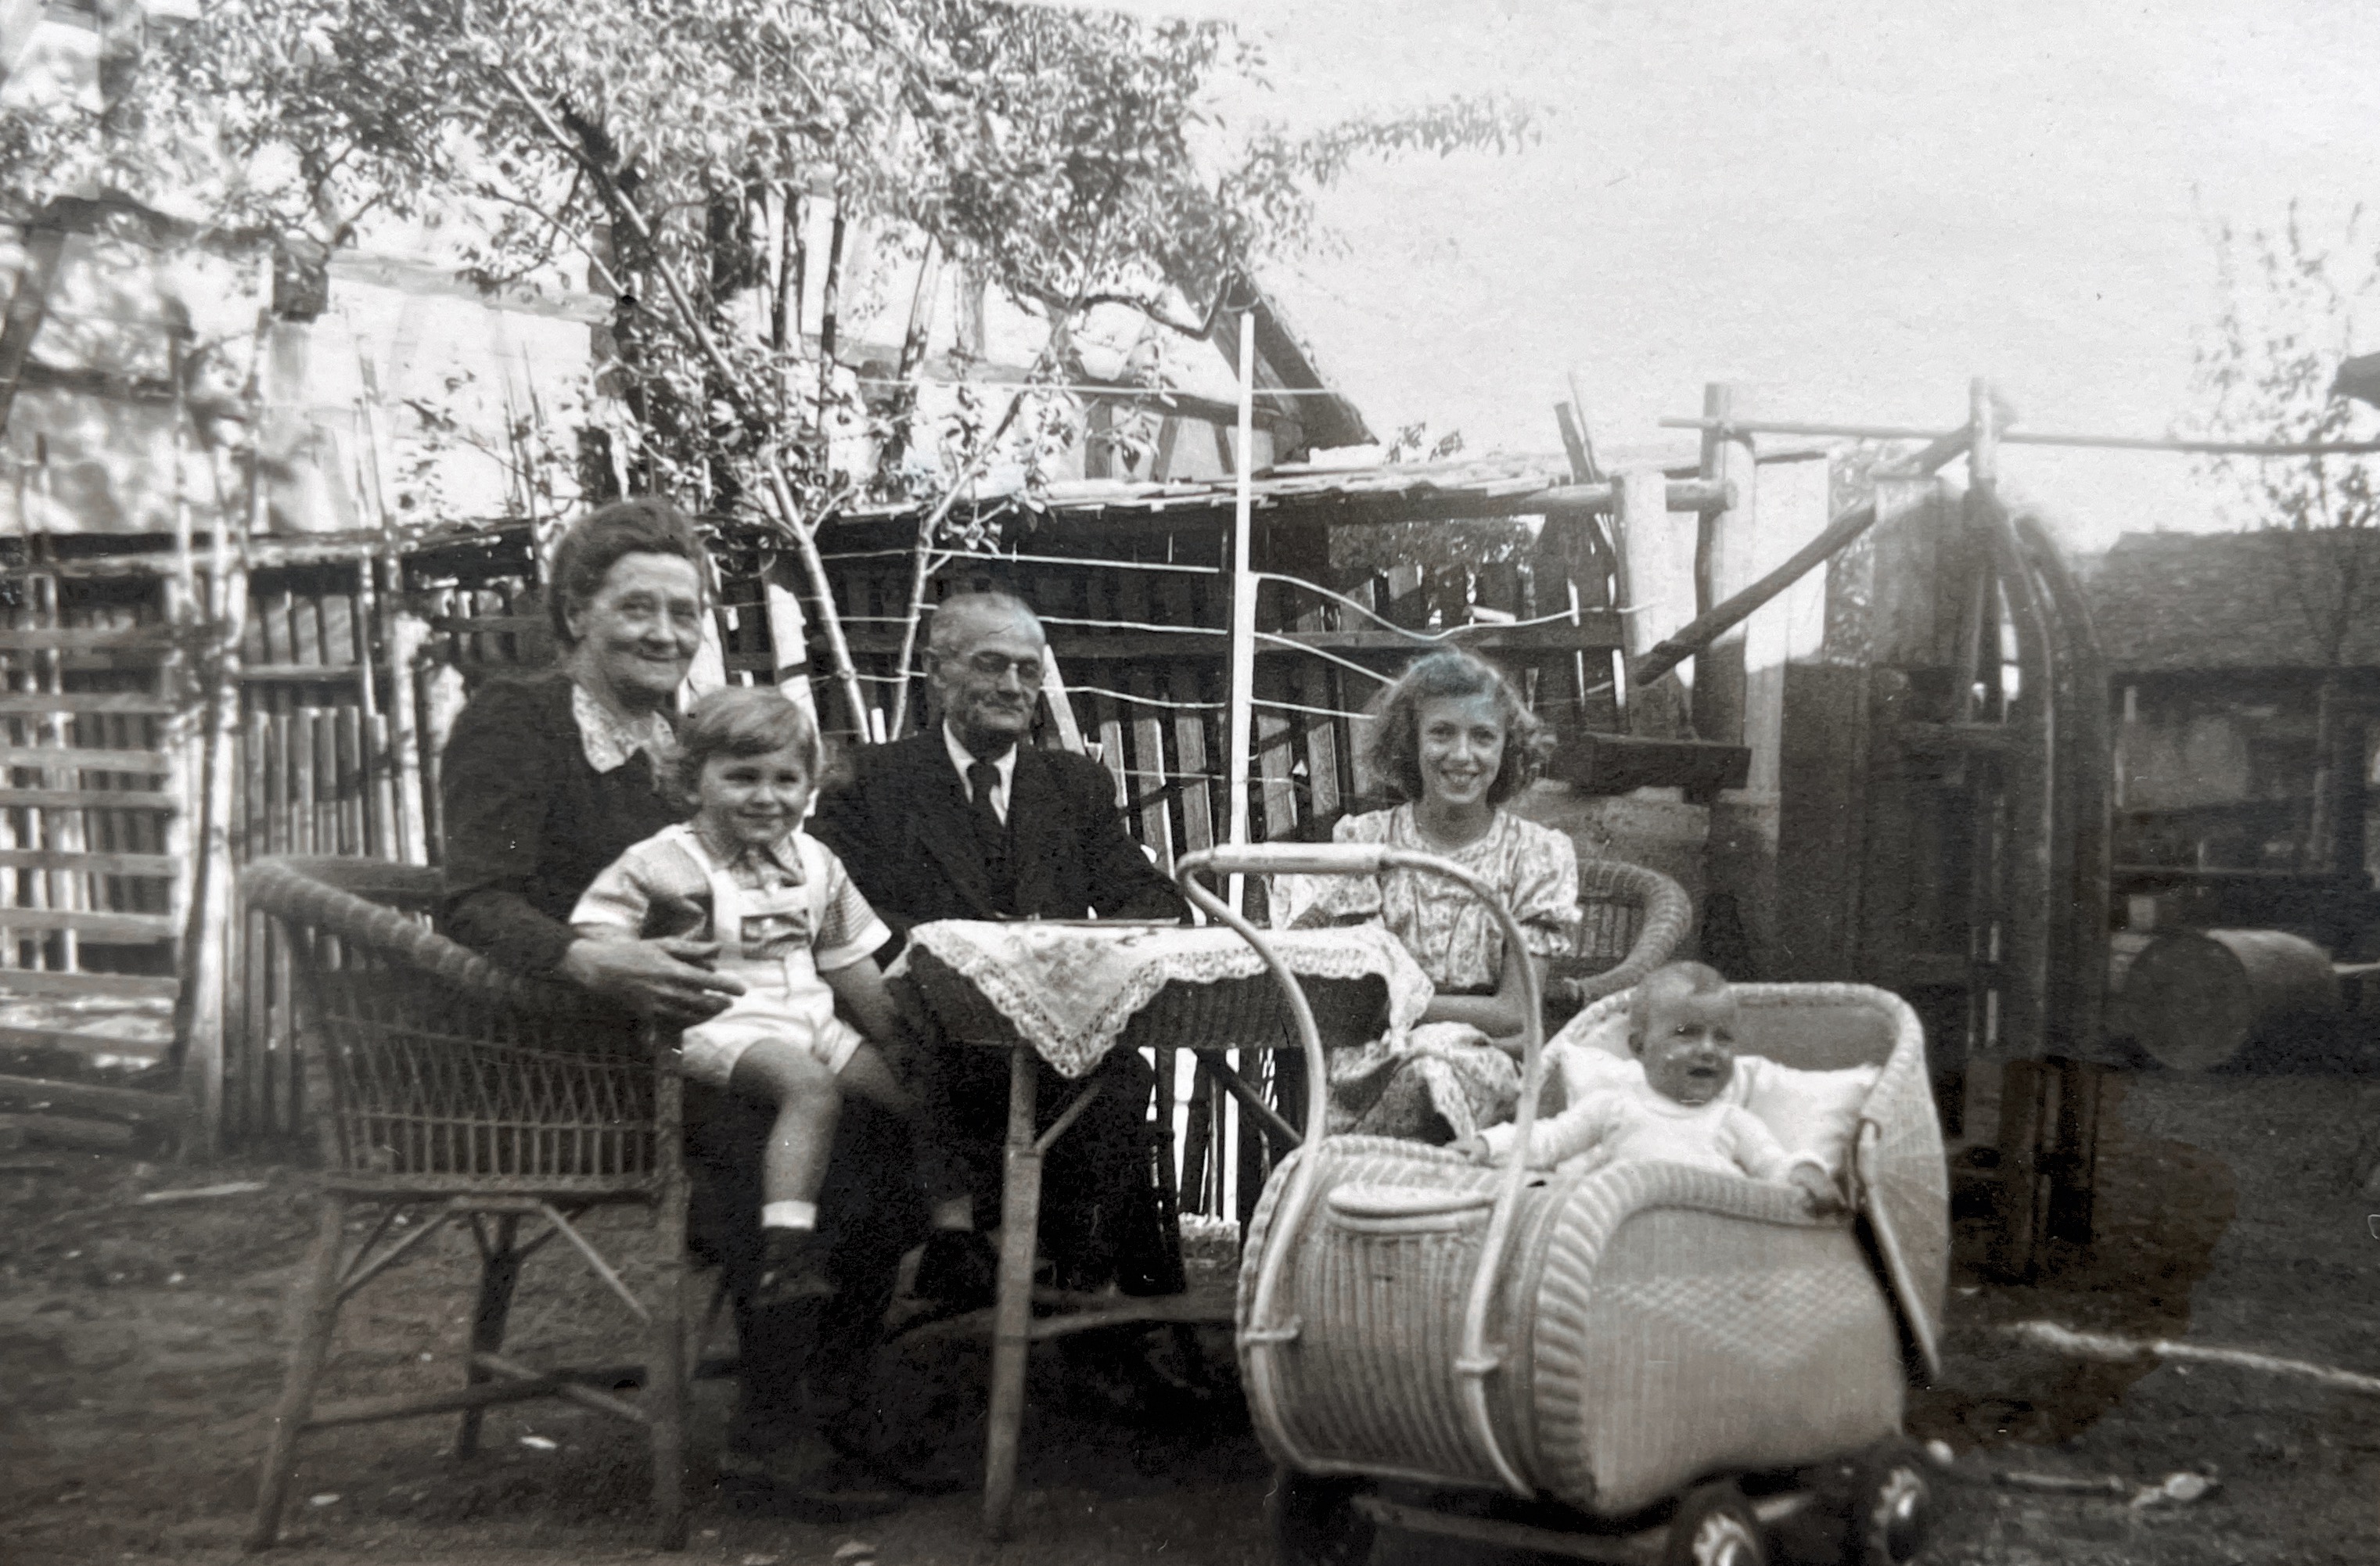 My grandparents, sister , cousin and myself in the pram. 1949